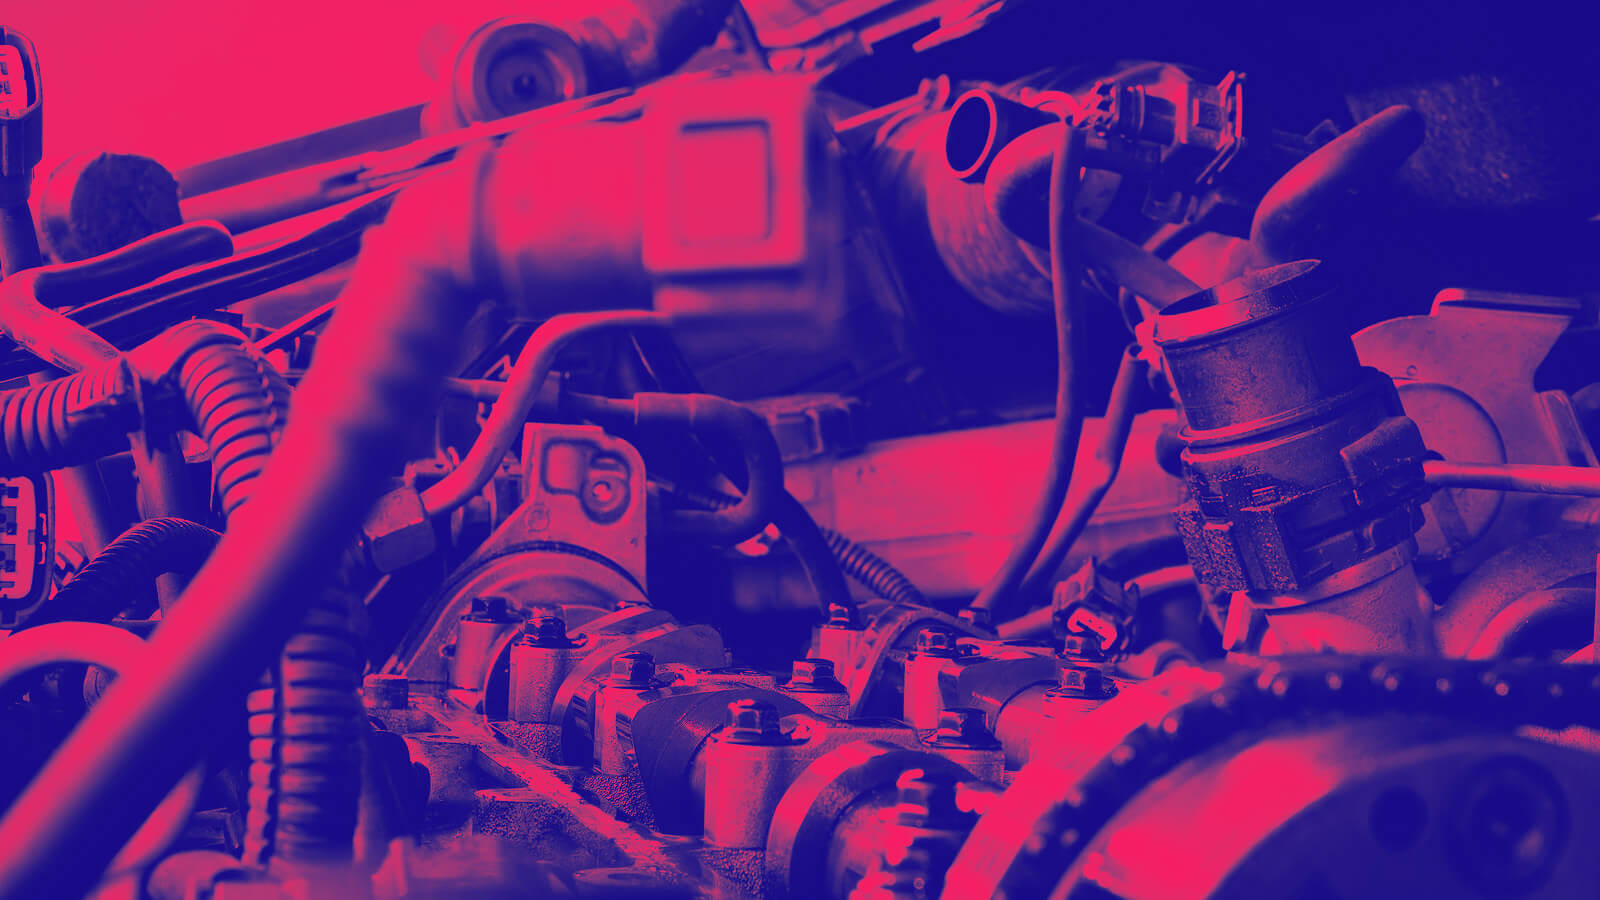 An engine is like our IBM technical support service.